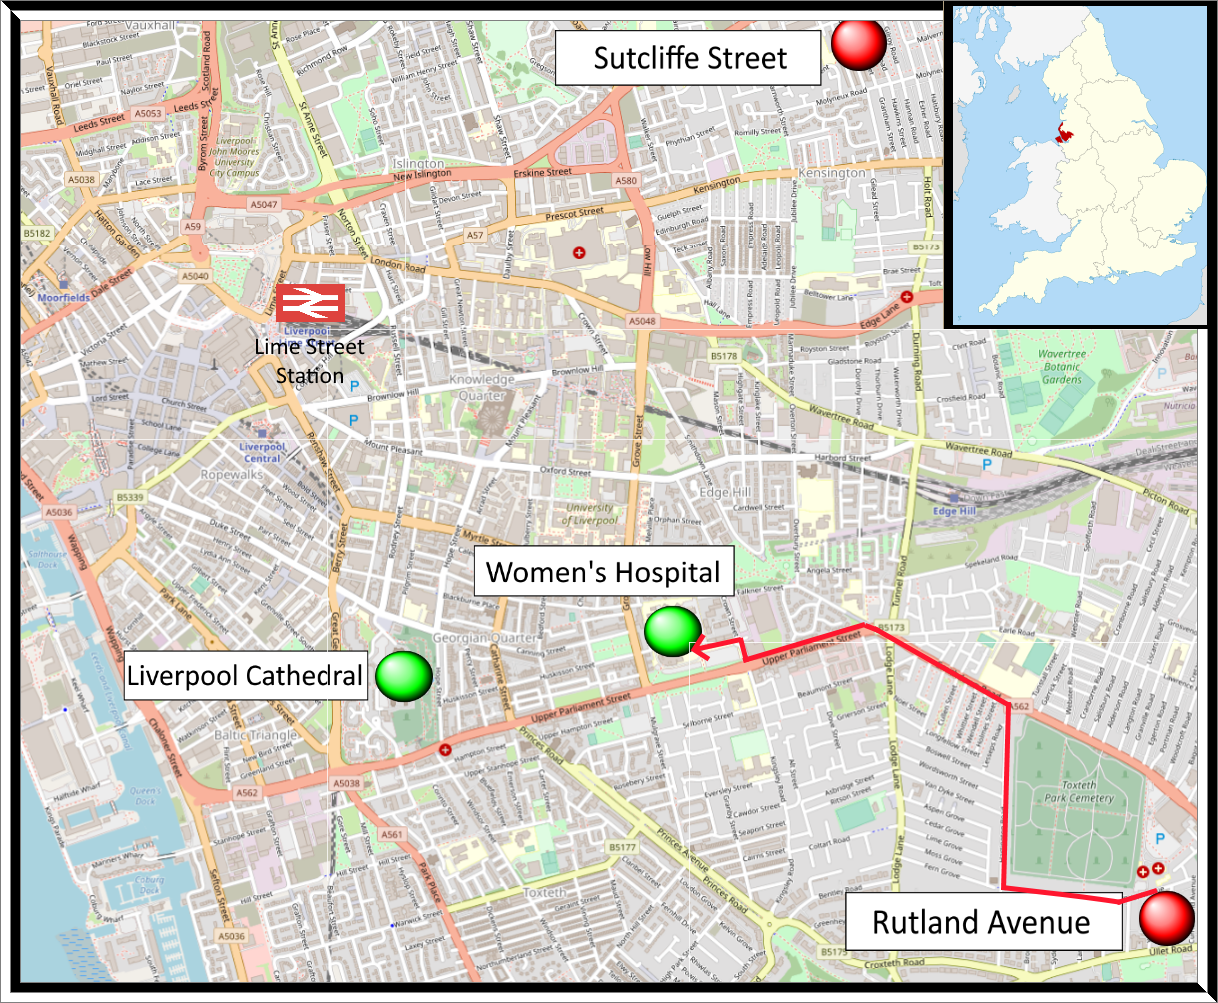 Map of Liverpool showing Remembrance Day bomb